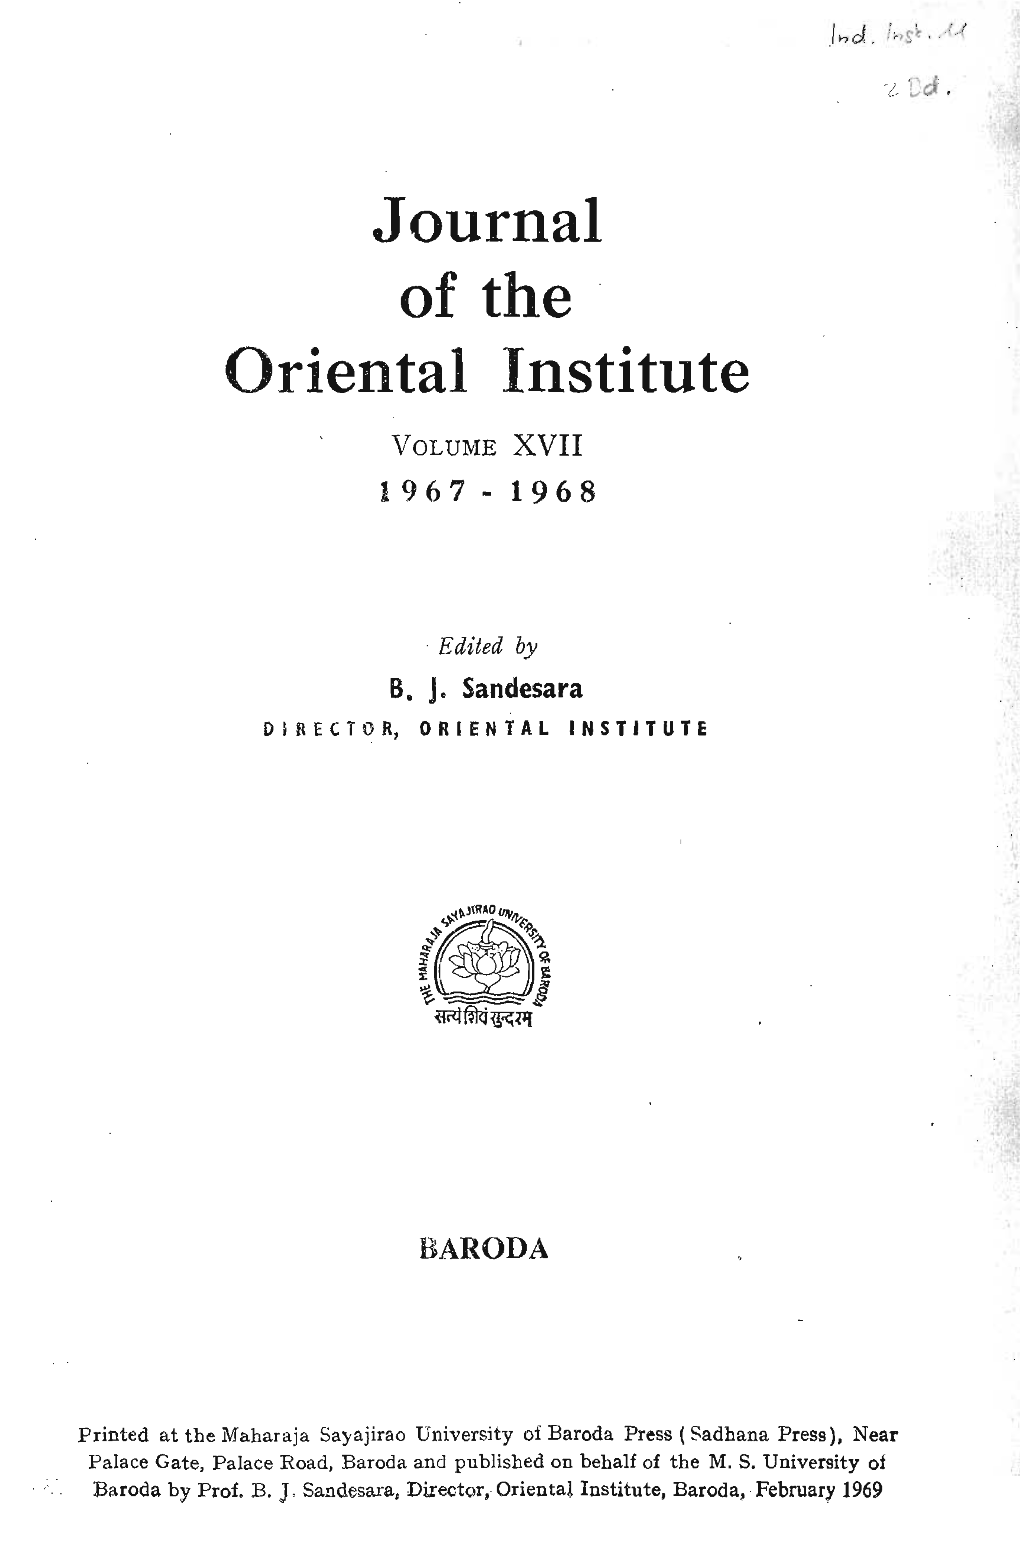 Journal of the Oriental Institute